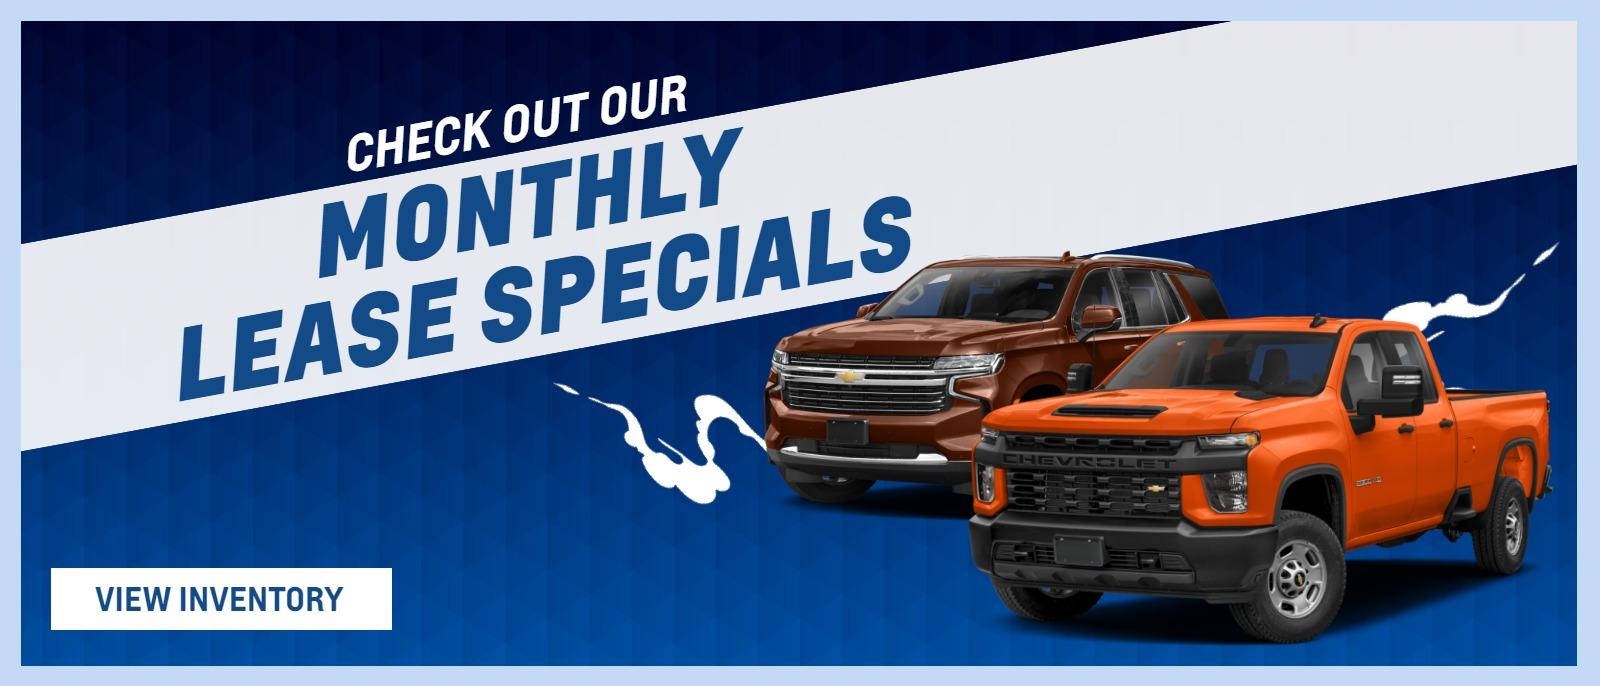 Check out our monthly lease specials